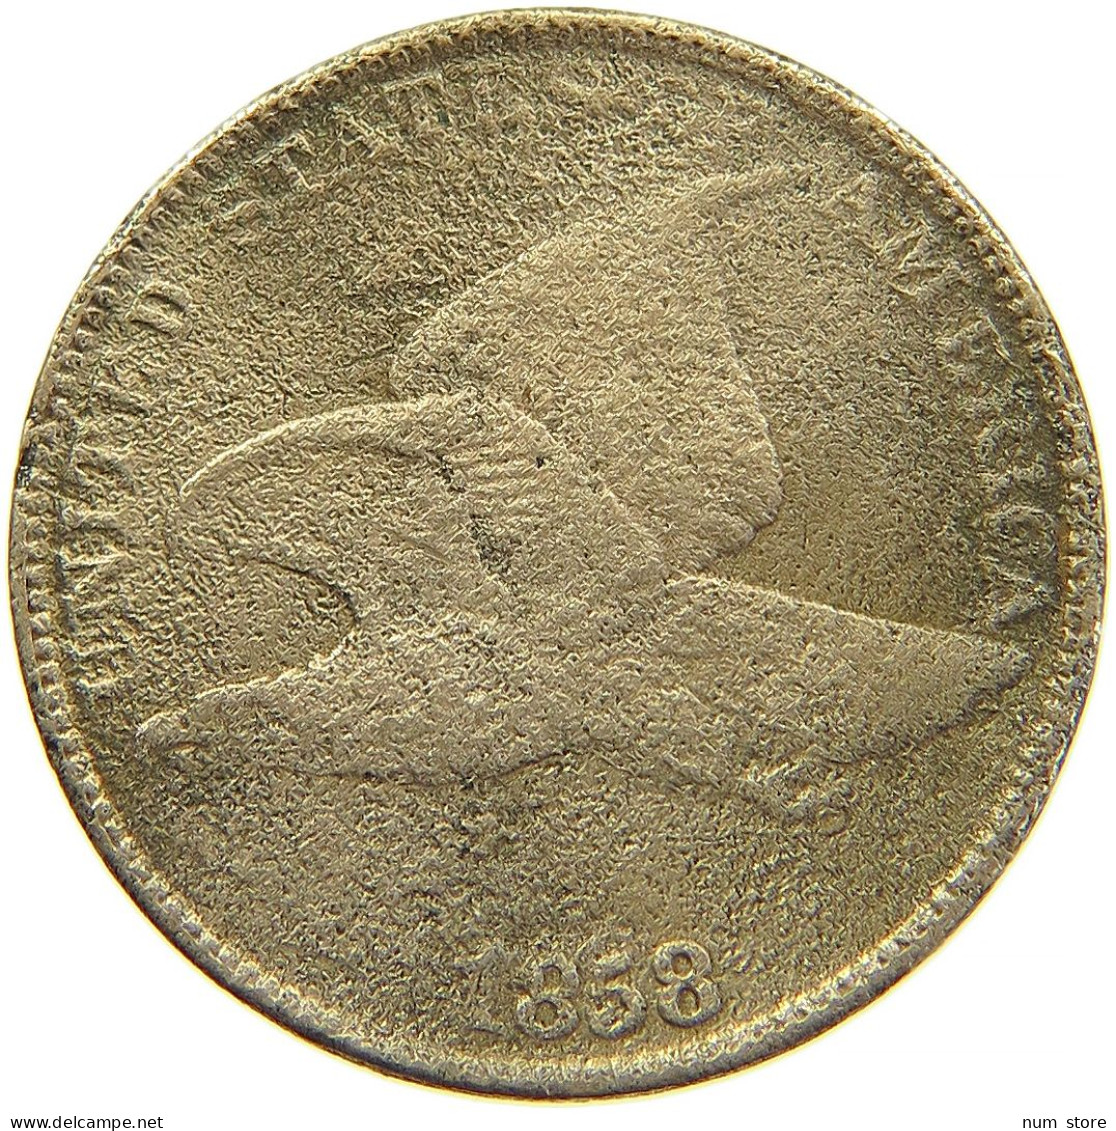 UNITED STATES OF AMERICA CENT 1858 FLYING EAGLE #s091 0401 - 1856-1858: Flying Eagle